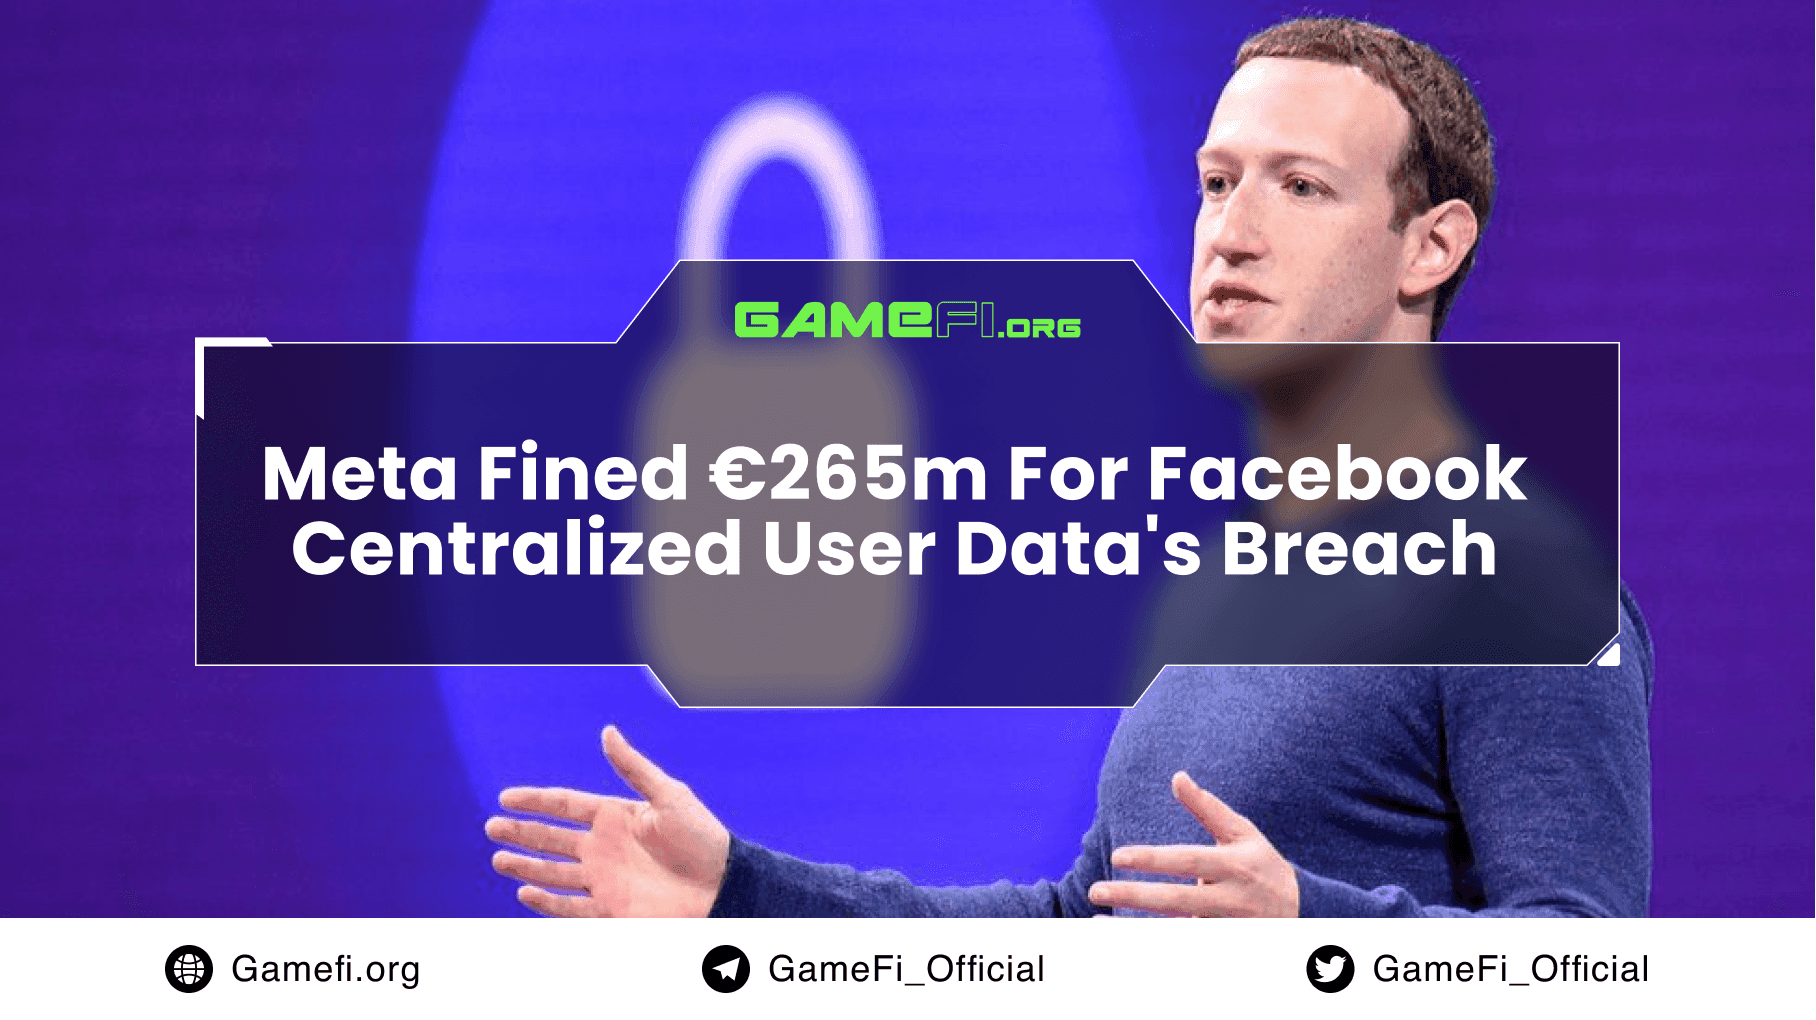 Meta Fined €265m For Facebook Centralized User Data's Breach